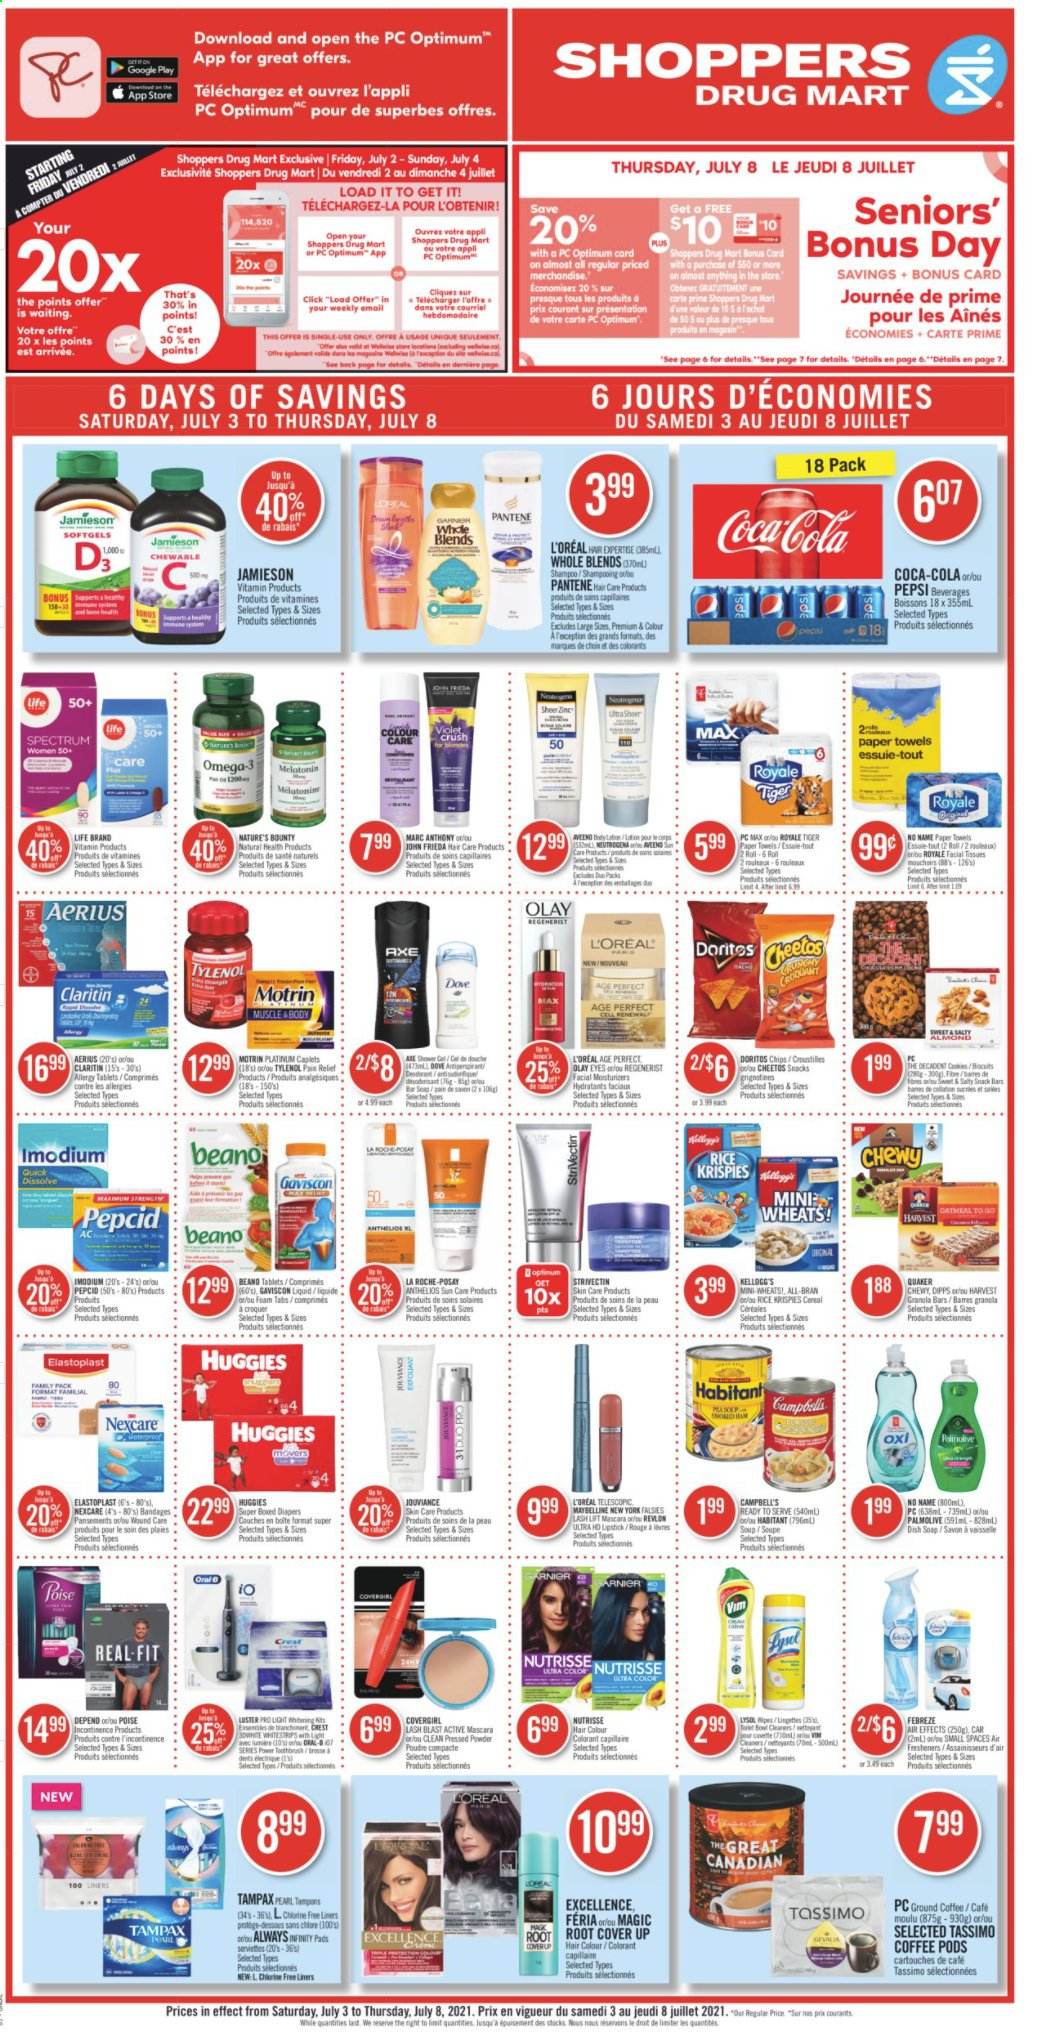 thumbnail - Shoppers Drug Mart Flyer - July 03, 2021 - July 08, 2021 - Sales products - snack, Doritos, Cheetos, oatmeal, soup, granola bar, Rice Krispies, Quaker, All-Bran, Coca-Cola, Pepsi, coffee pods, ground coffee, nappies, tissues, kitchen towels, paper towels, shower gel, Palmolive, soap, Crest, tampons, Always Infinity, facial tissues, L’Oréal, La Roche-Posay, Olay, Revlon, hair color, John Frieda, lipstick, face powder, pain relief, Melatonin, Nature's Bounty, Tylenol, Pepcid, Omega-3, zinc, Spectrum, Gaviscon, Motrin, mascara, Maybelline, shampoo, Tampax, Huggies, Pantene, chips. Page 1.